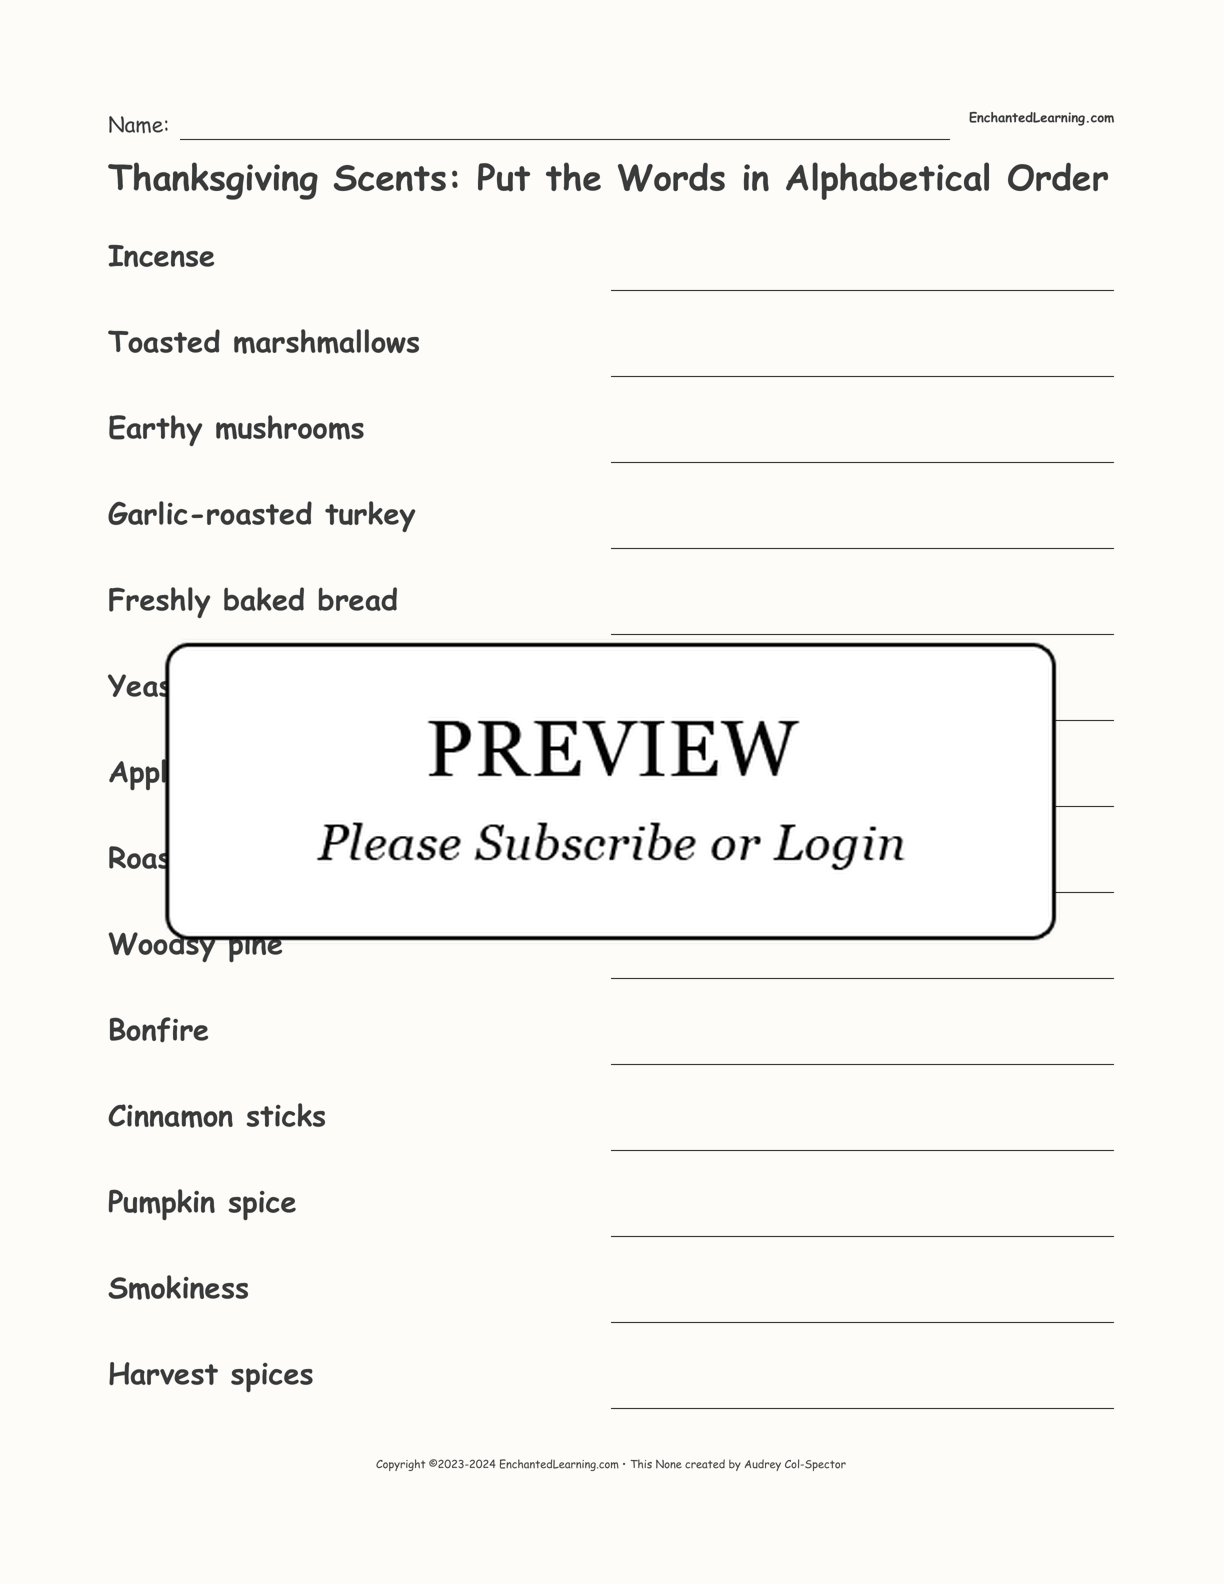 Thanksgiving Scents: Put the Words in Alphabetical Order interactive worksheet page 1